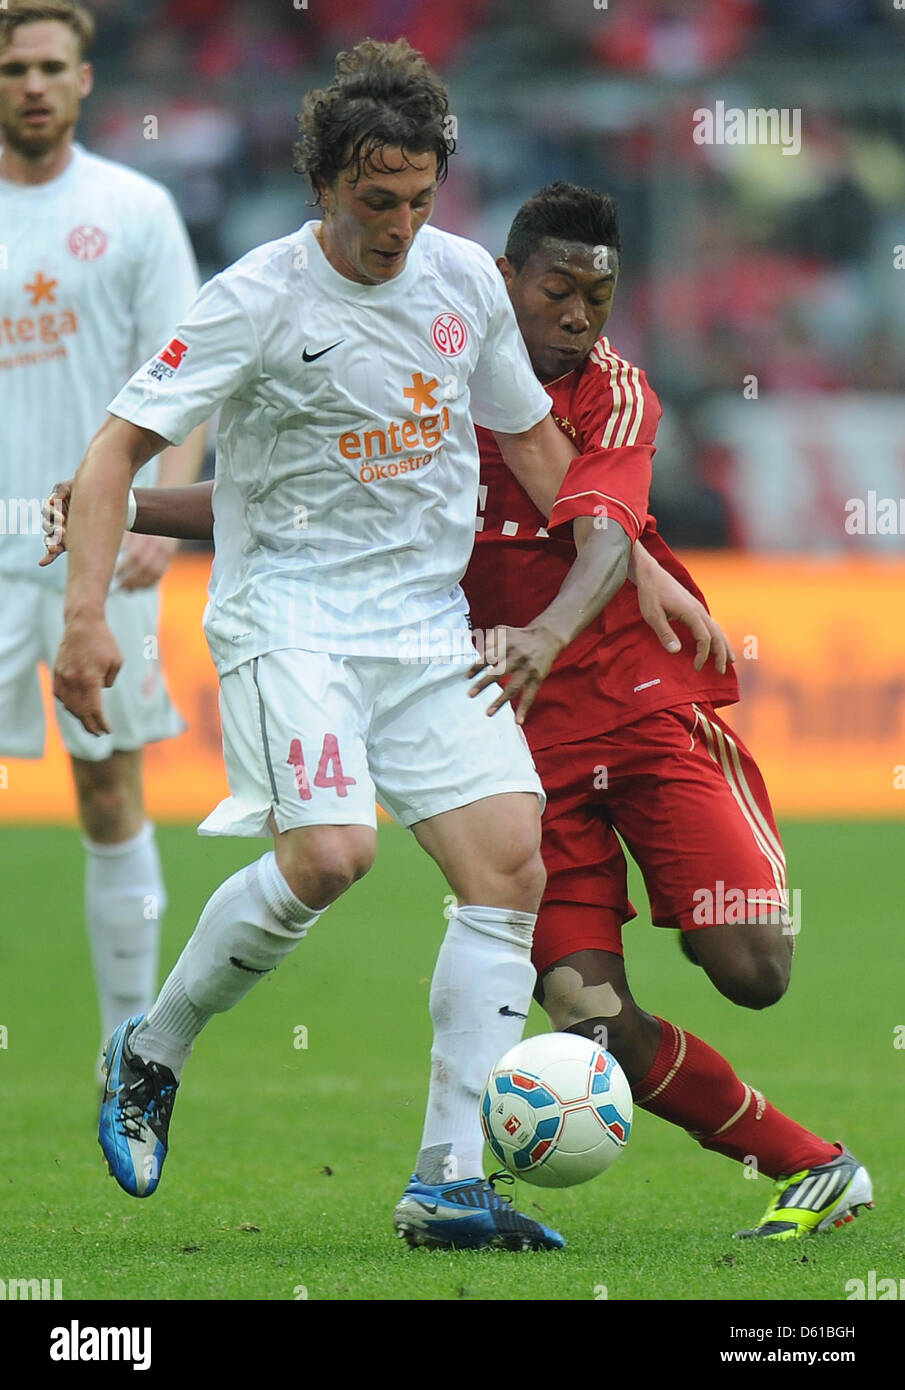 FC Bayern Munich's David Alaba (R) vies for the ball with Mainz's Julian Baumgartlinger during the German Budnesliga soccer match between FC Bayern Munich and FSV Mainz 05 at the Allianz Arena in Munich, Germany, 14 April 2012. Photo: Marc Mueller Stock Photo